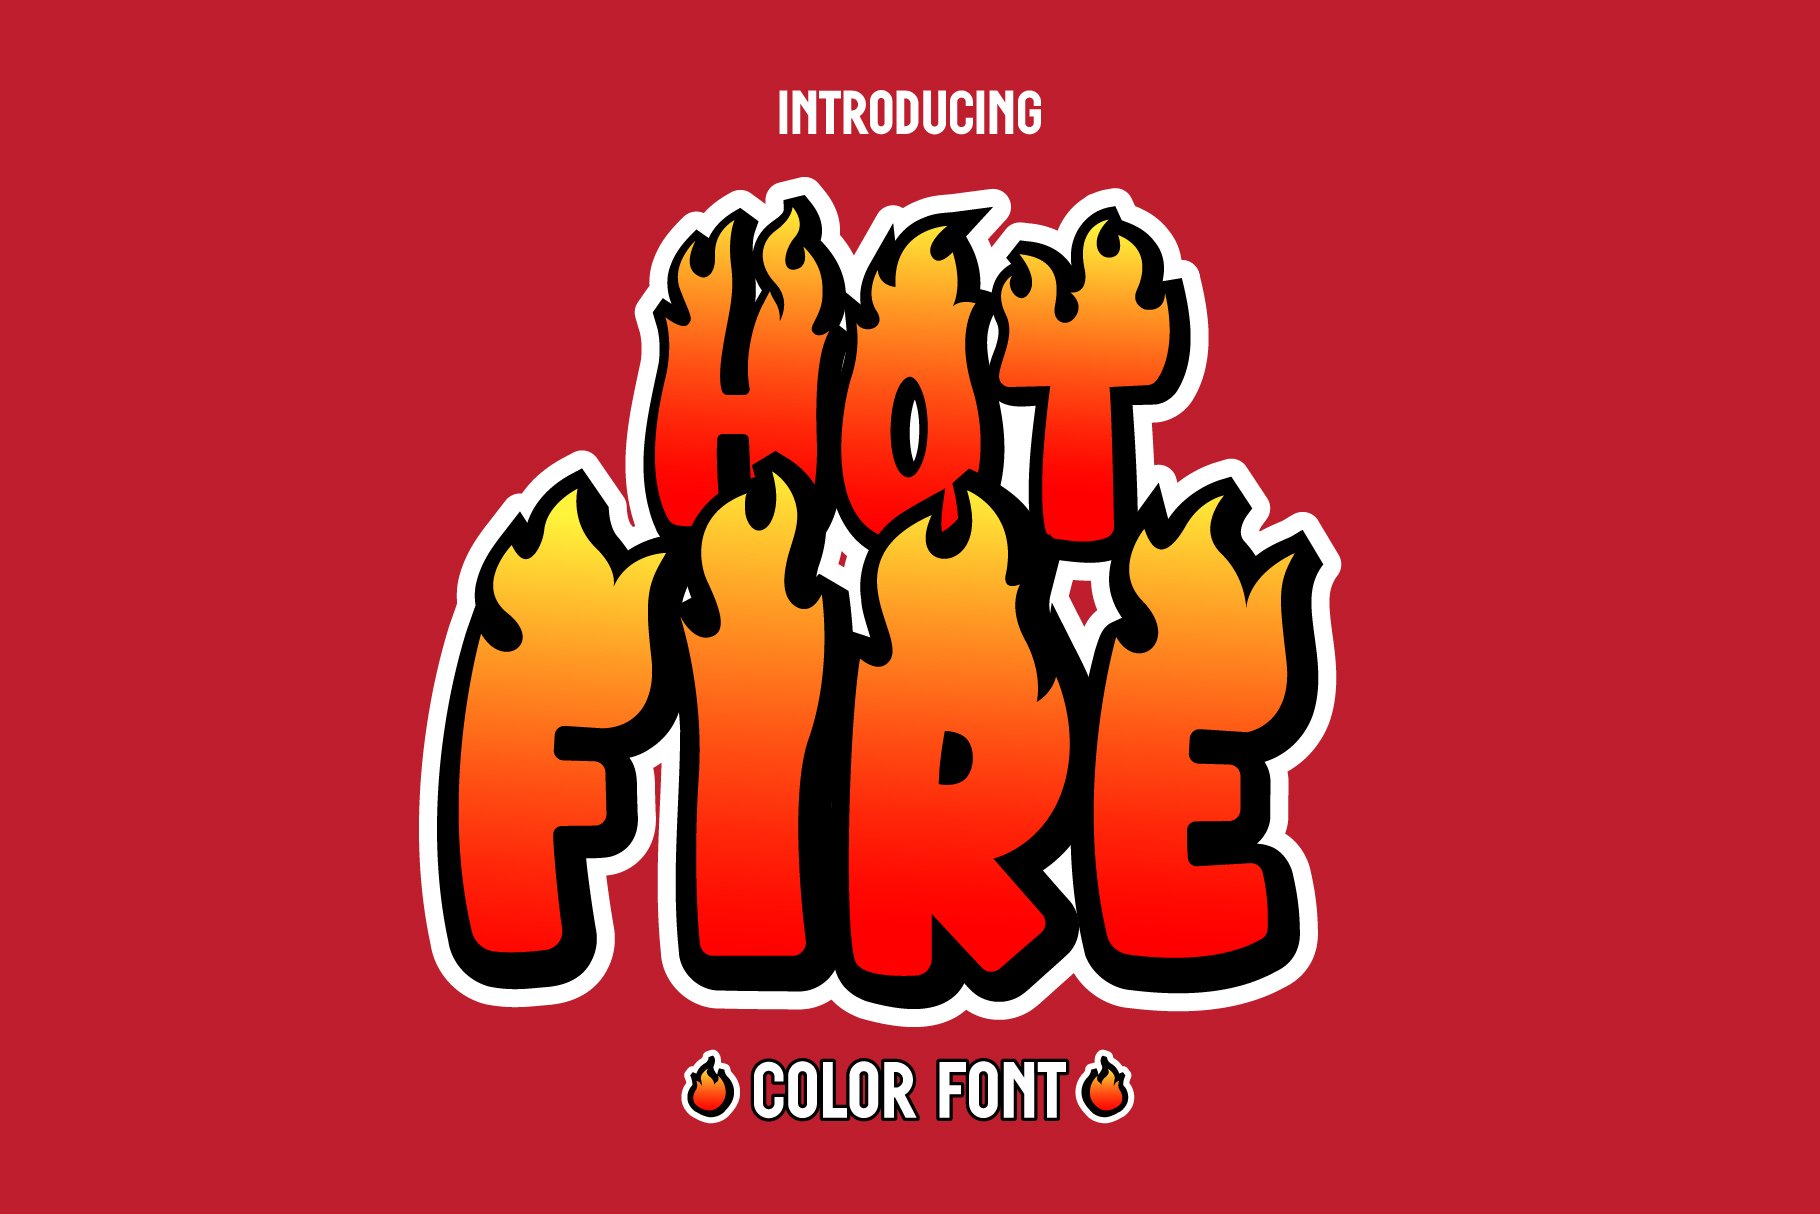 Hot Fire Color Fonts cover image.